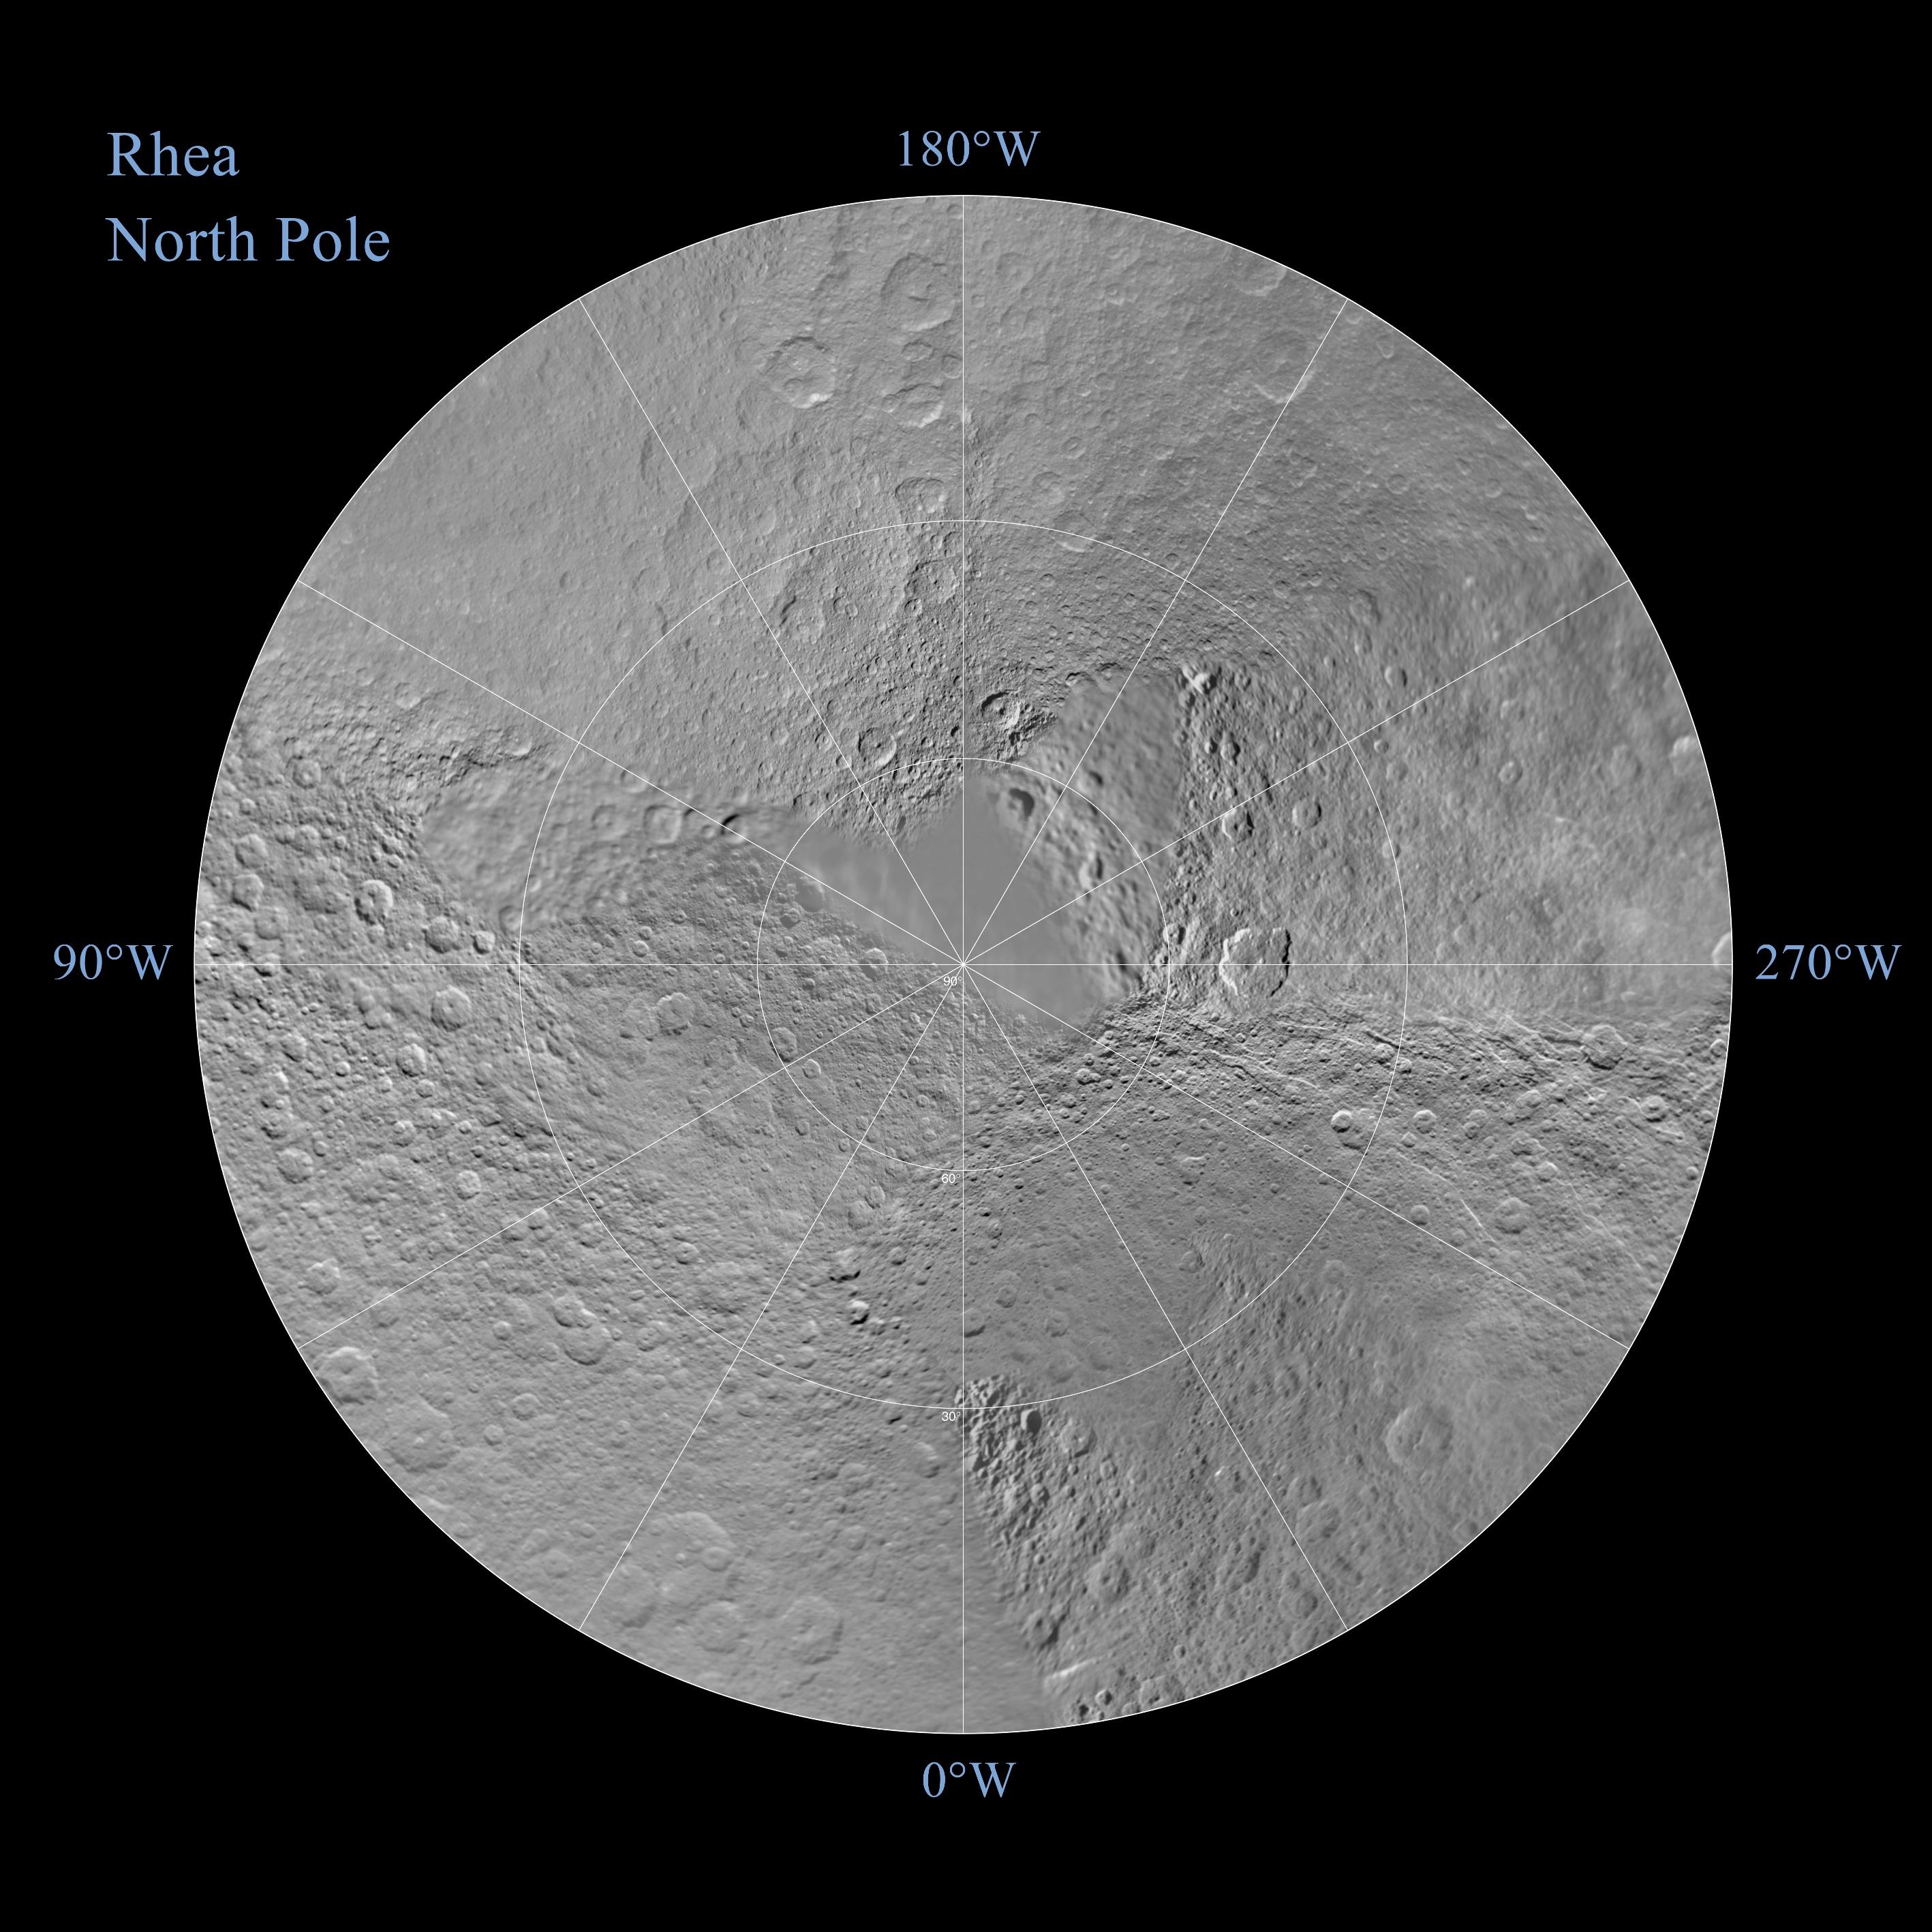 The northern and southern hemispheres of Rhea